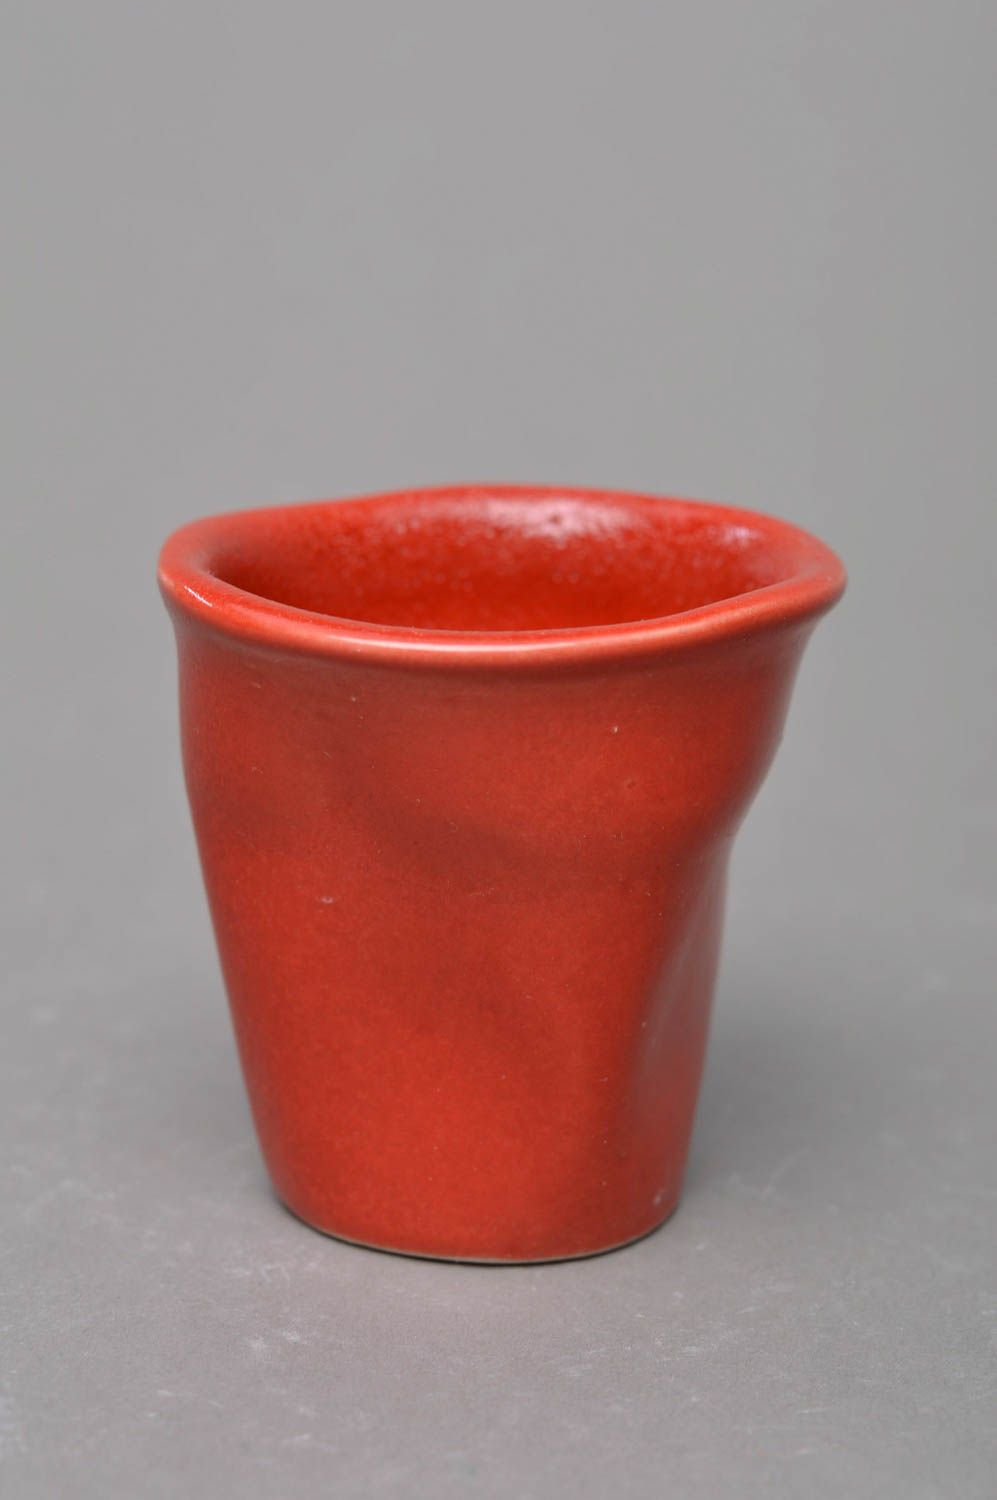 Small fake plastic porcelain crinkle 3 oz cup in red color with no handle photo 2